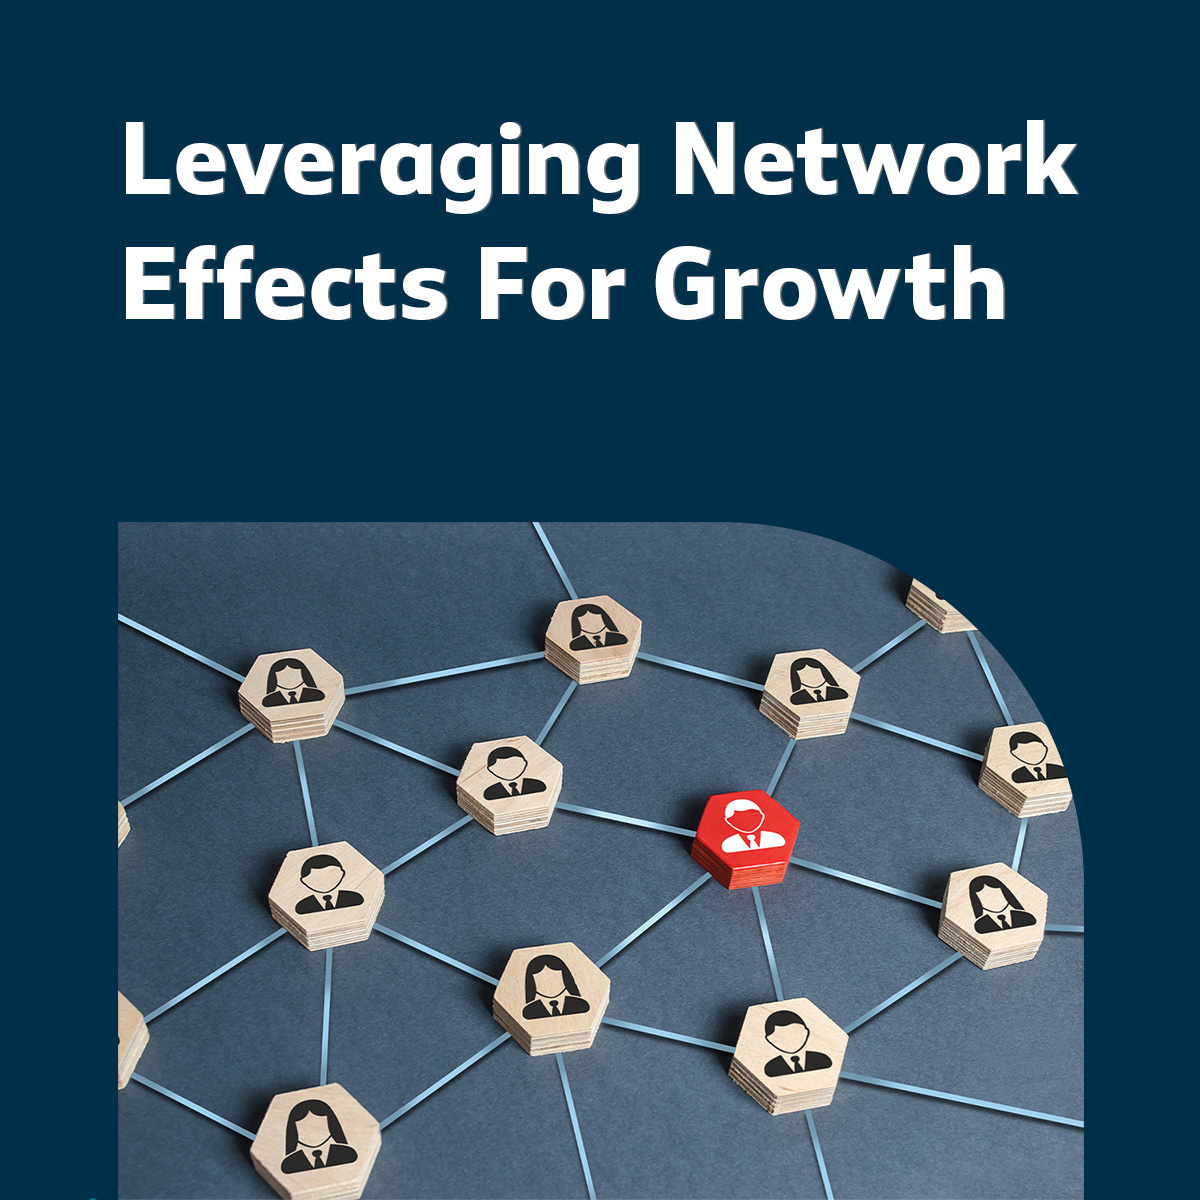 Leveraging Network Effects for Business Growth